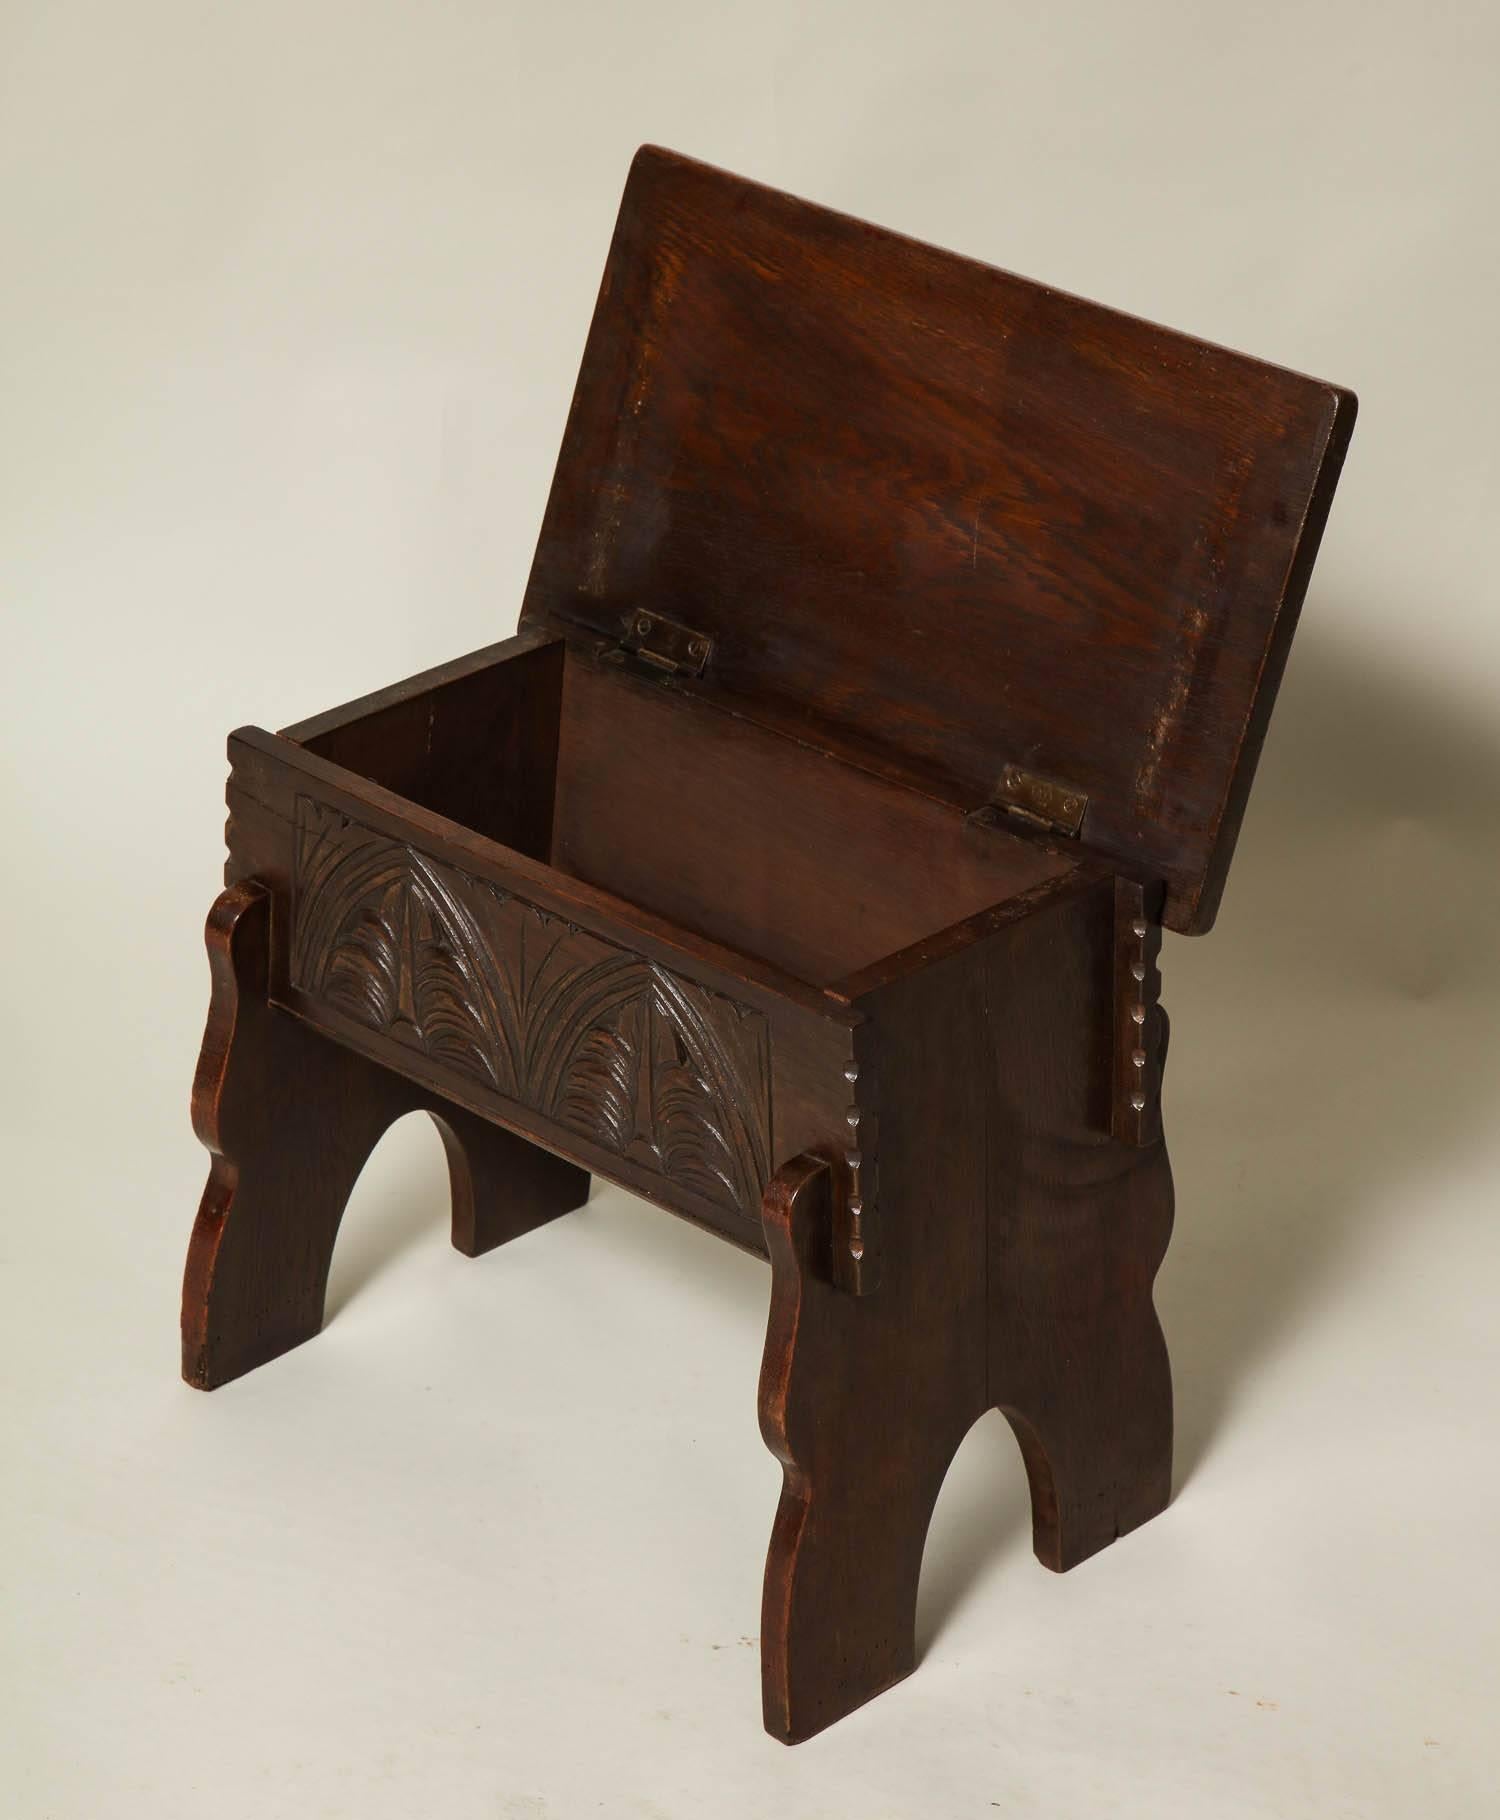 Good English Arts & Crafts period Gothic inspired stool, the hinged top over lunette carved apron, the splayed and arched legs notched to the front and back apron and having inset bottom, the whole with pleasing color and wear. Great as side table